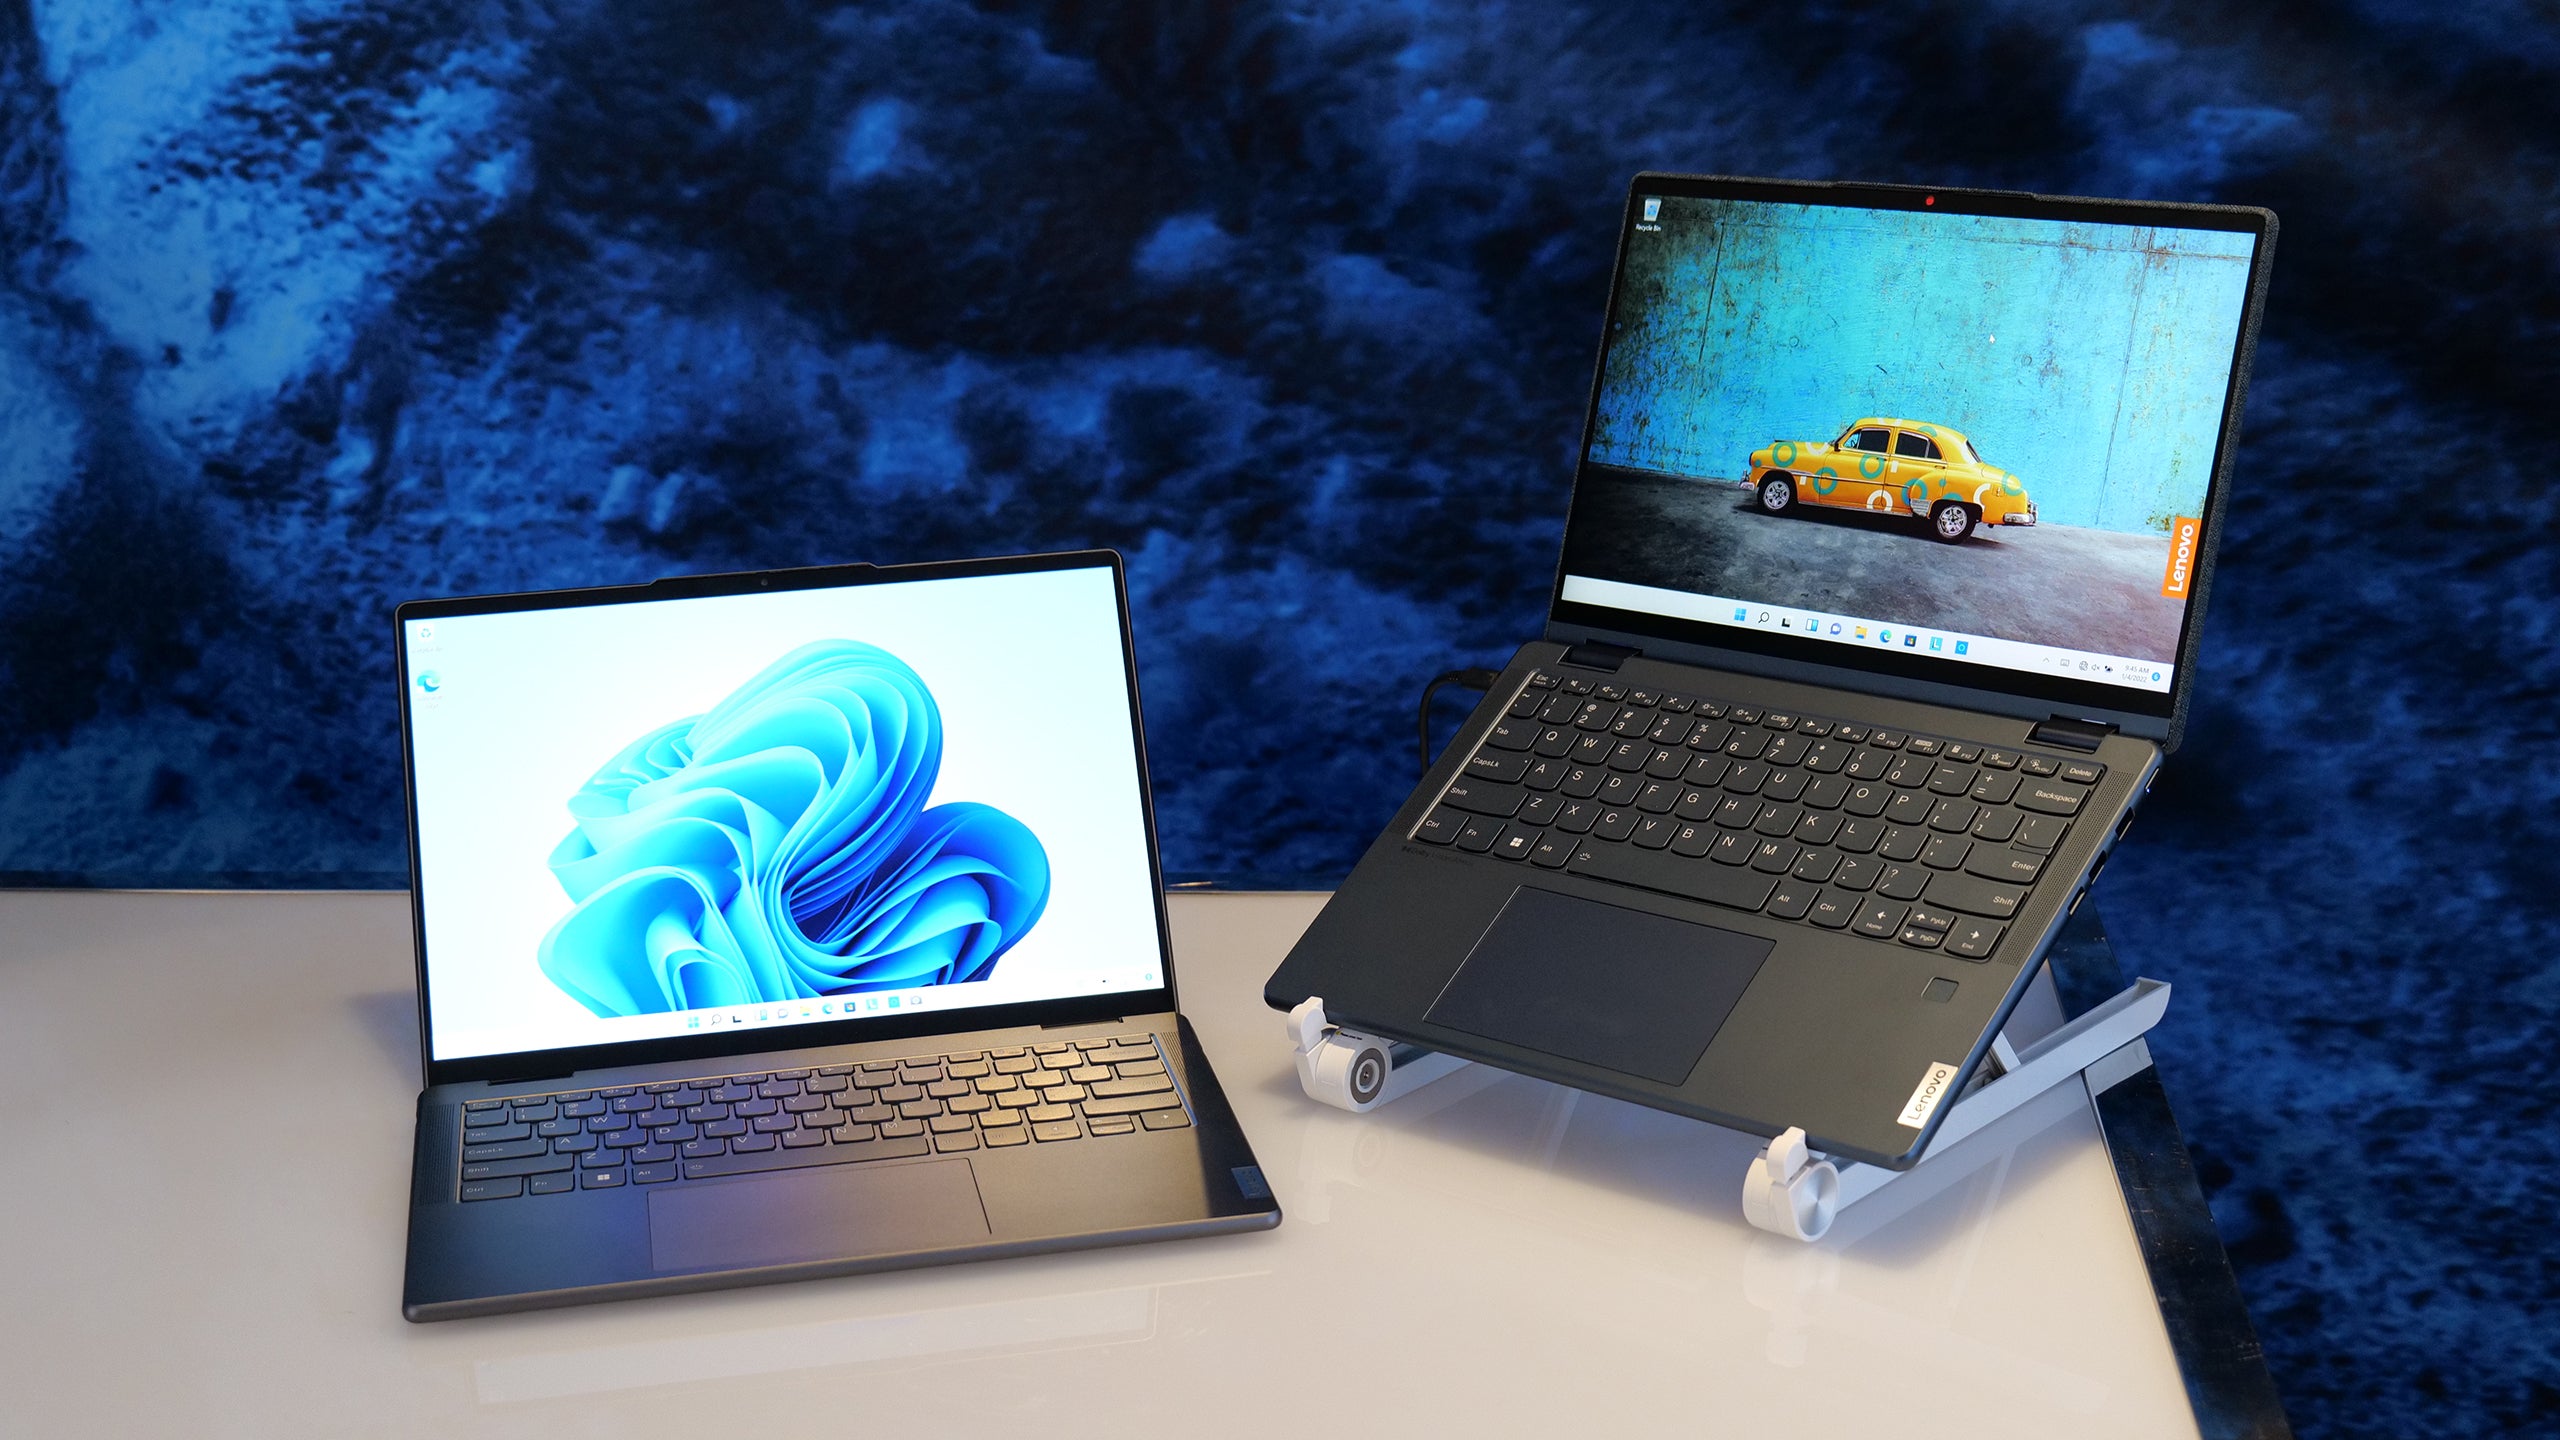 Yoga 6 is pictured on the right (Photo: Sam Rutherford/Gizmodo)